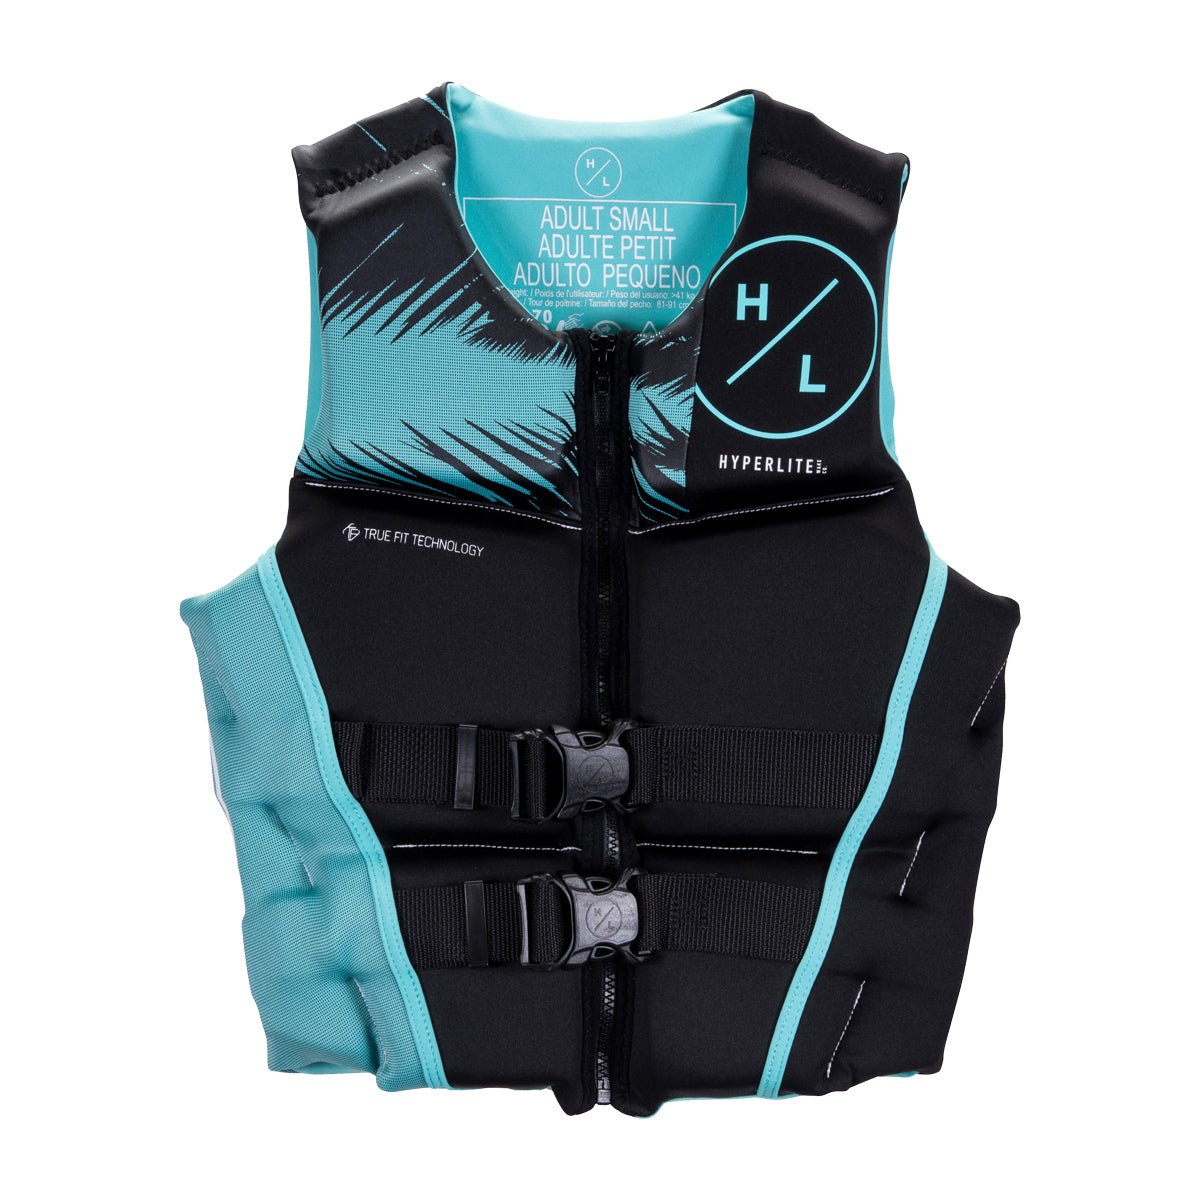  Ronix Supreme - Yes - US/CA CGA Life Vest, Charcoal  Grey/Black, 3X-Large : Sports & Outdoors